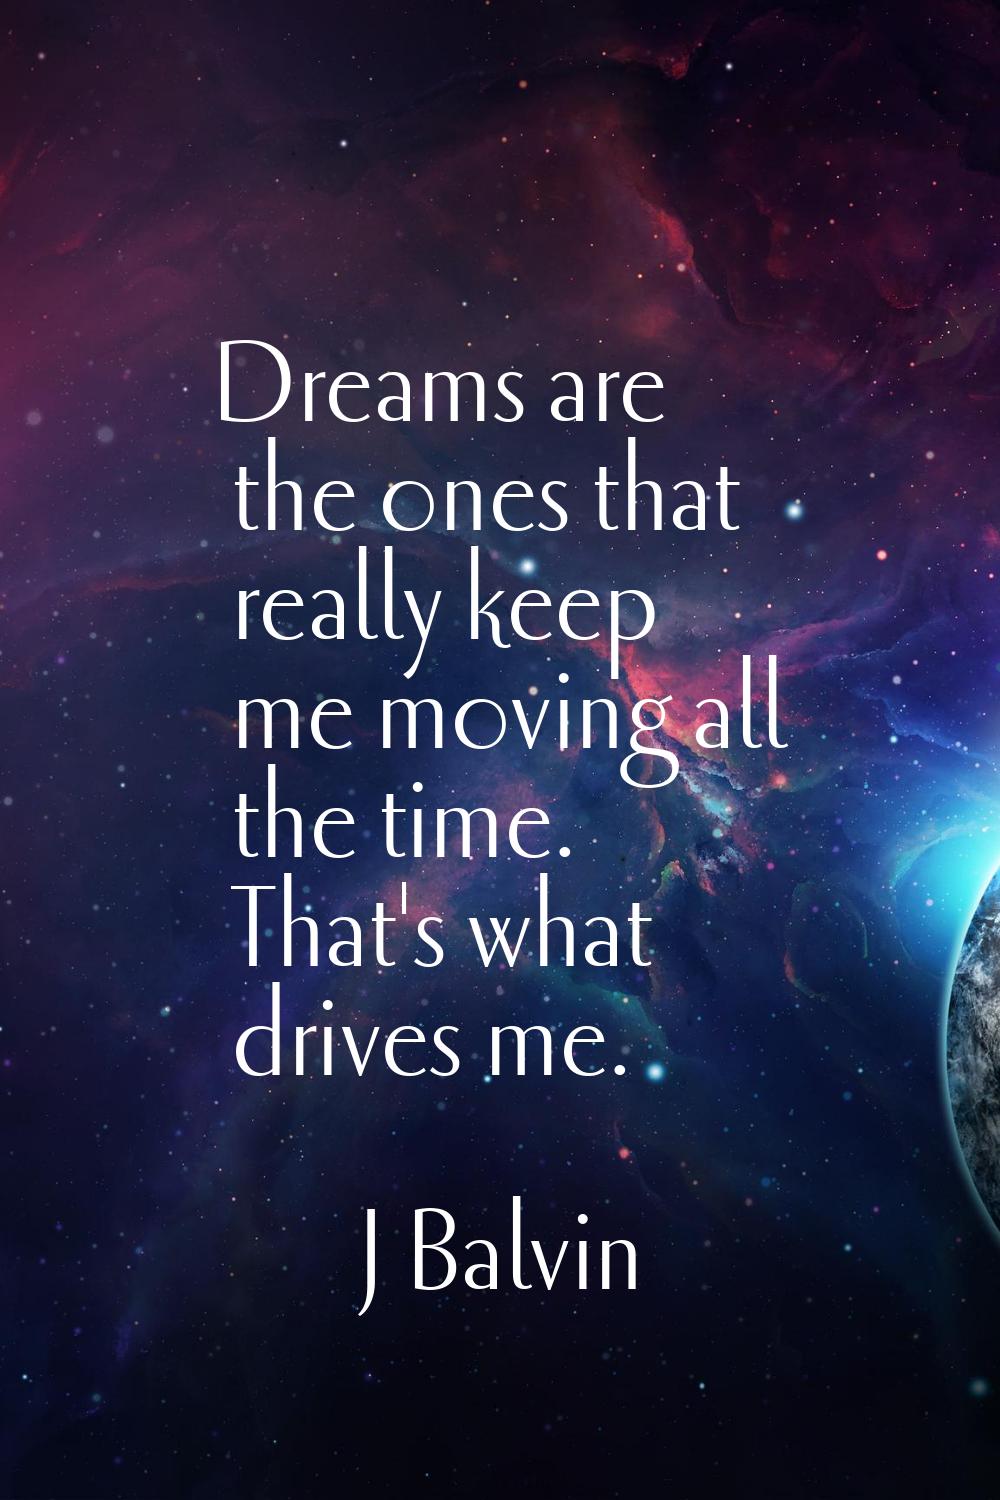 Dreams are the ones that really keep me moving all the time. That's what drives me.